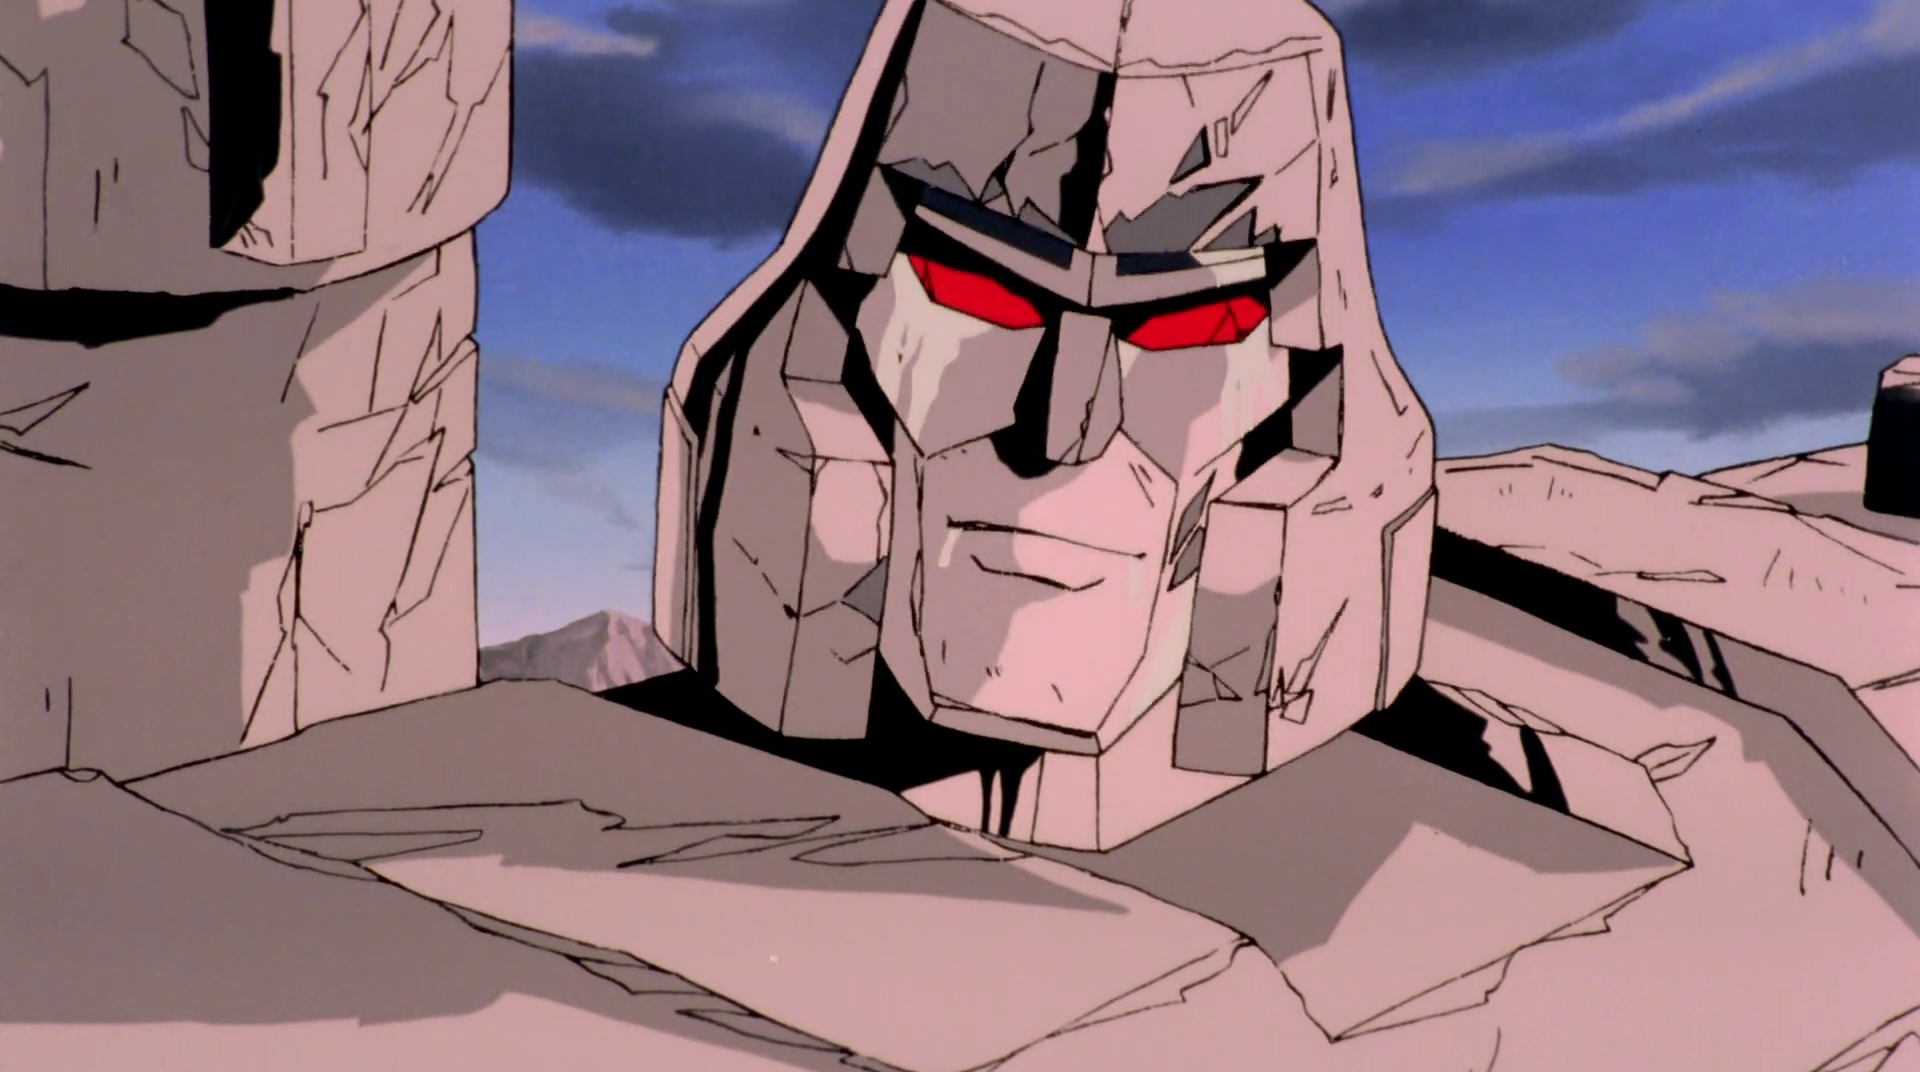 Megatron FROM Transformers The Movie 1986. Transformers, Widescreen wallpaper, Free picture